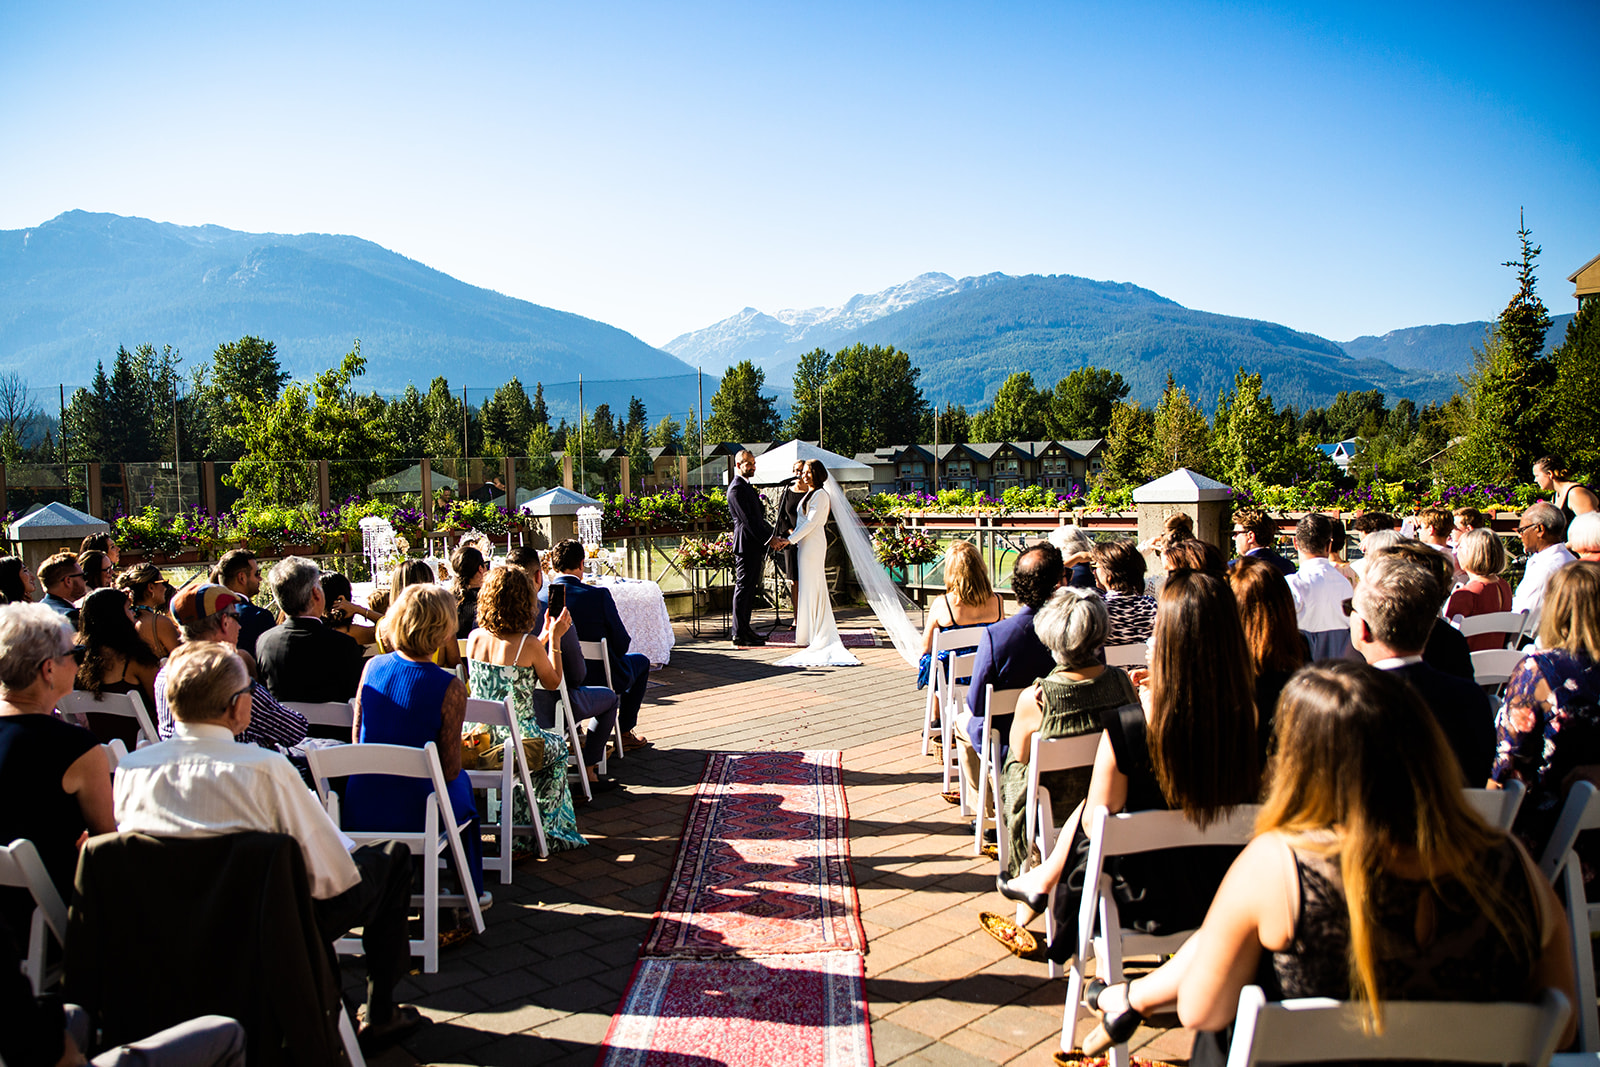 Wedding venue in Whistler with stunning mountain views